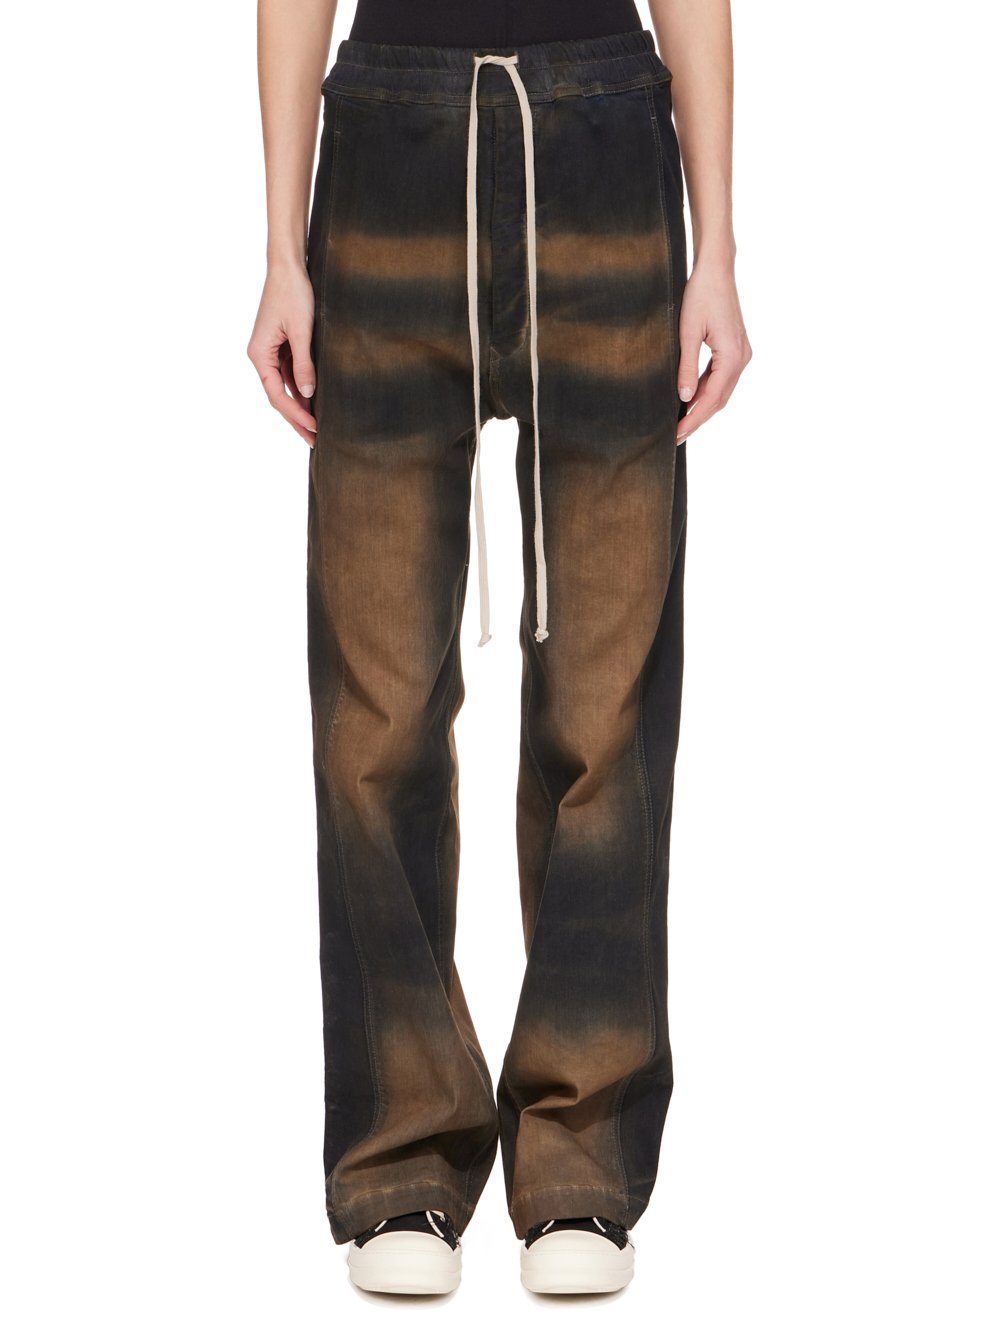 RICK OWENS FW23 LUXOR PUSHER PANTS IN MUD WASHED STRETCH DENIM